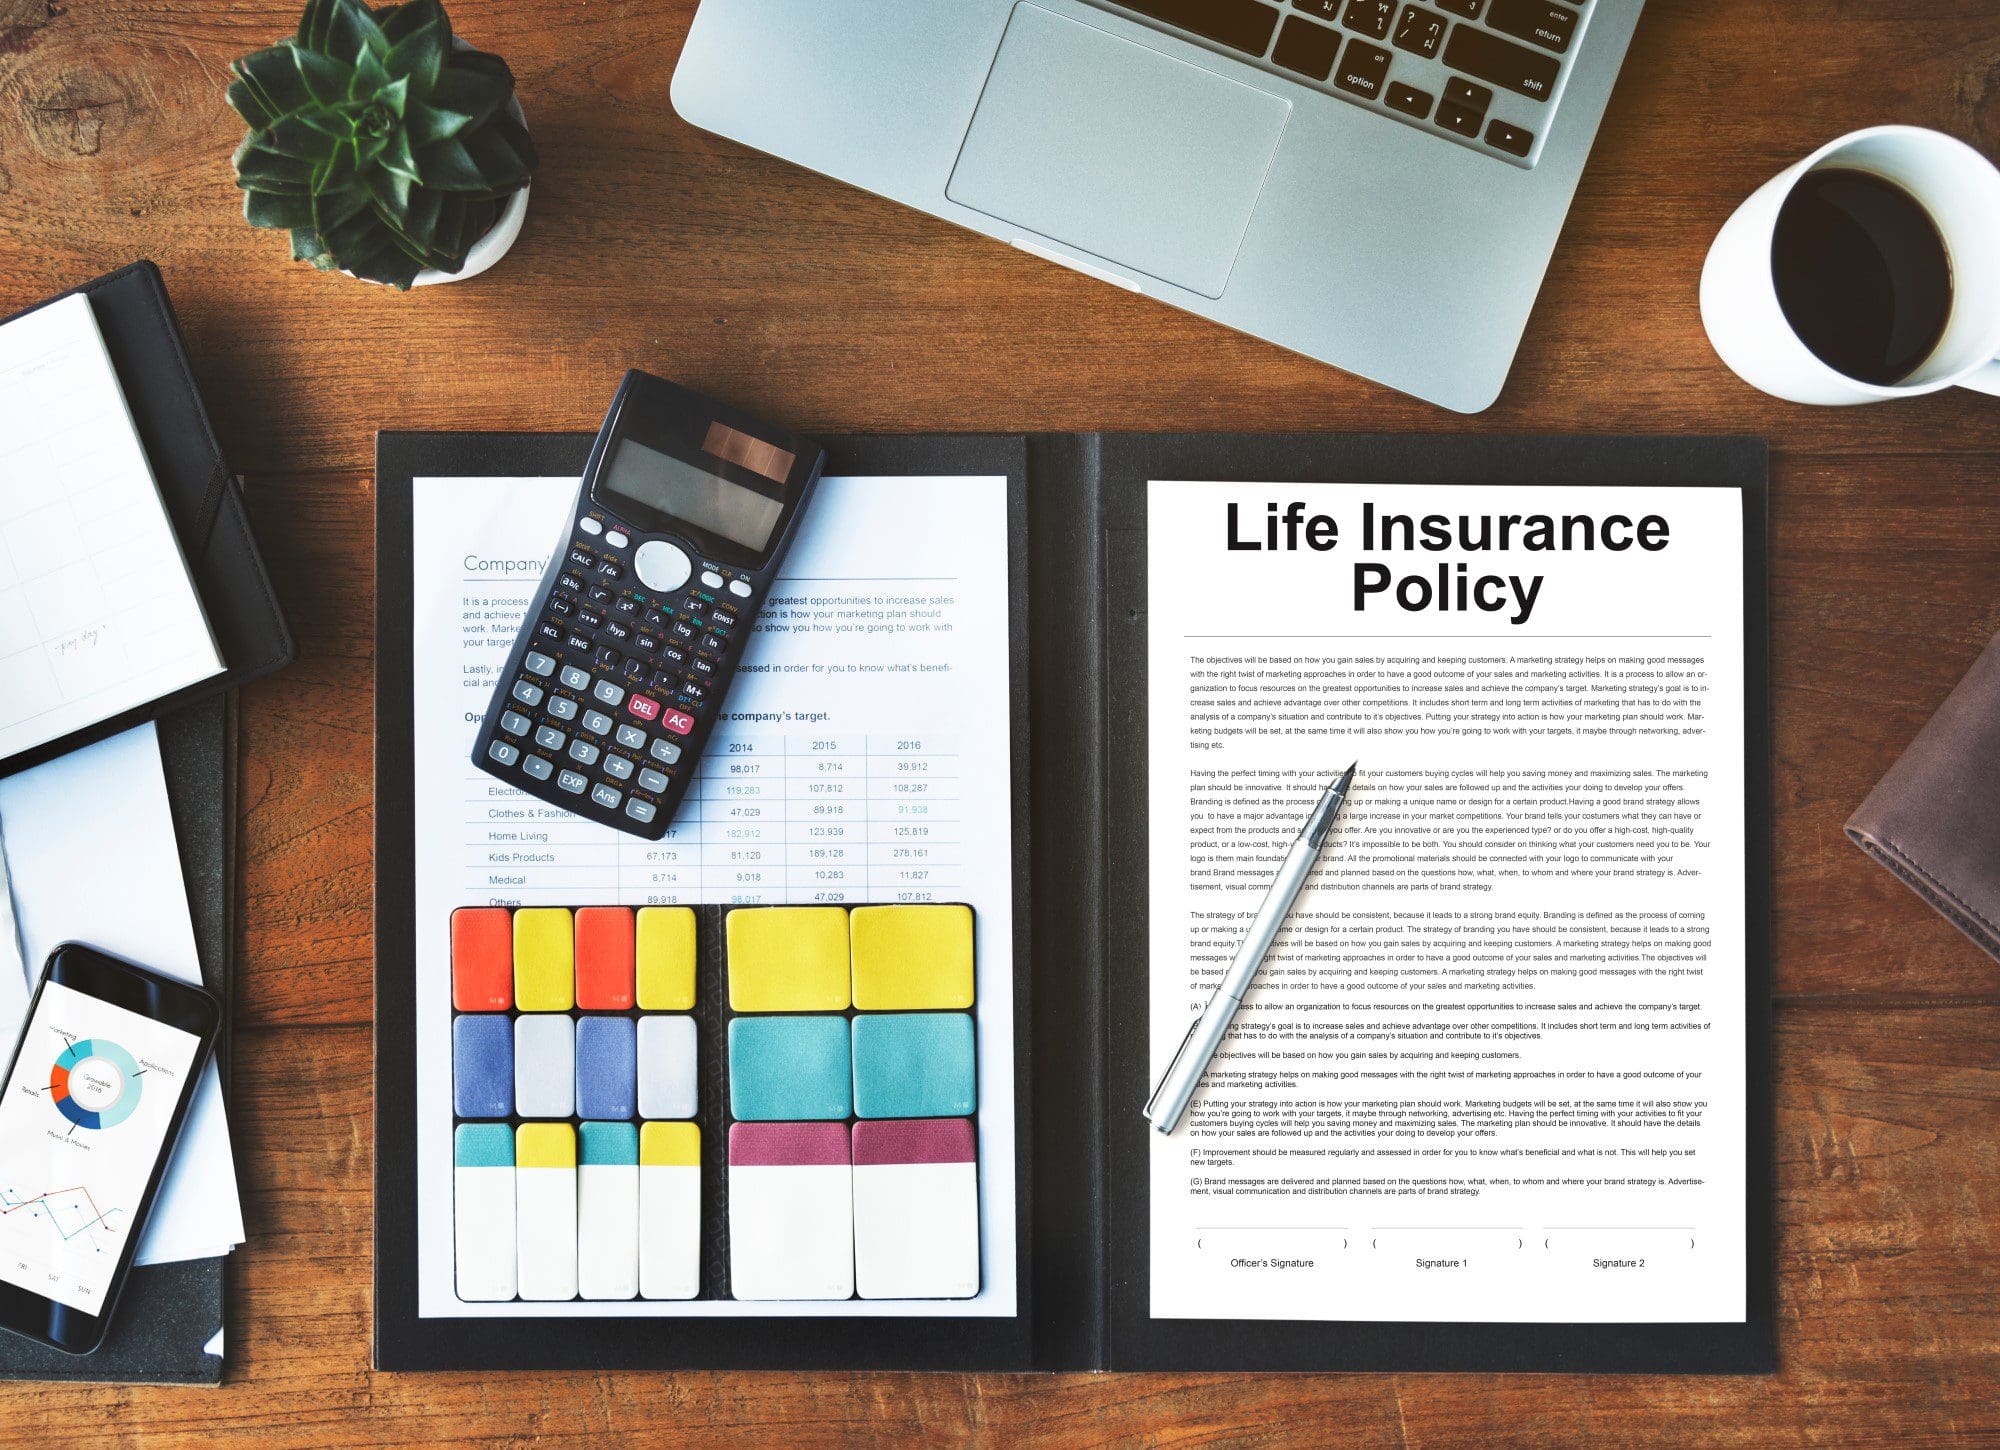 What Happens If You Outlive Term Insurance?